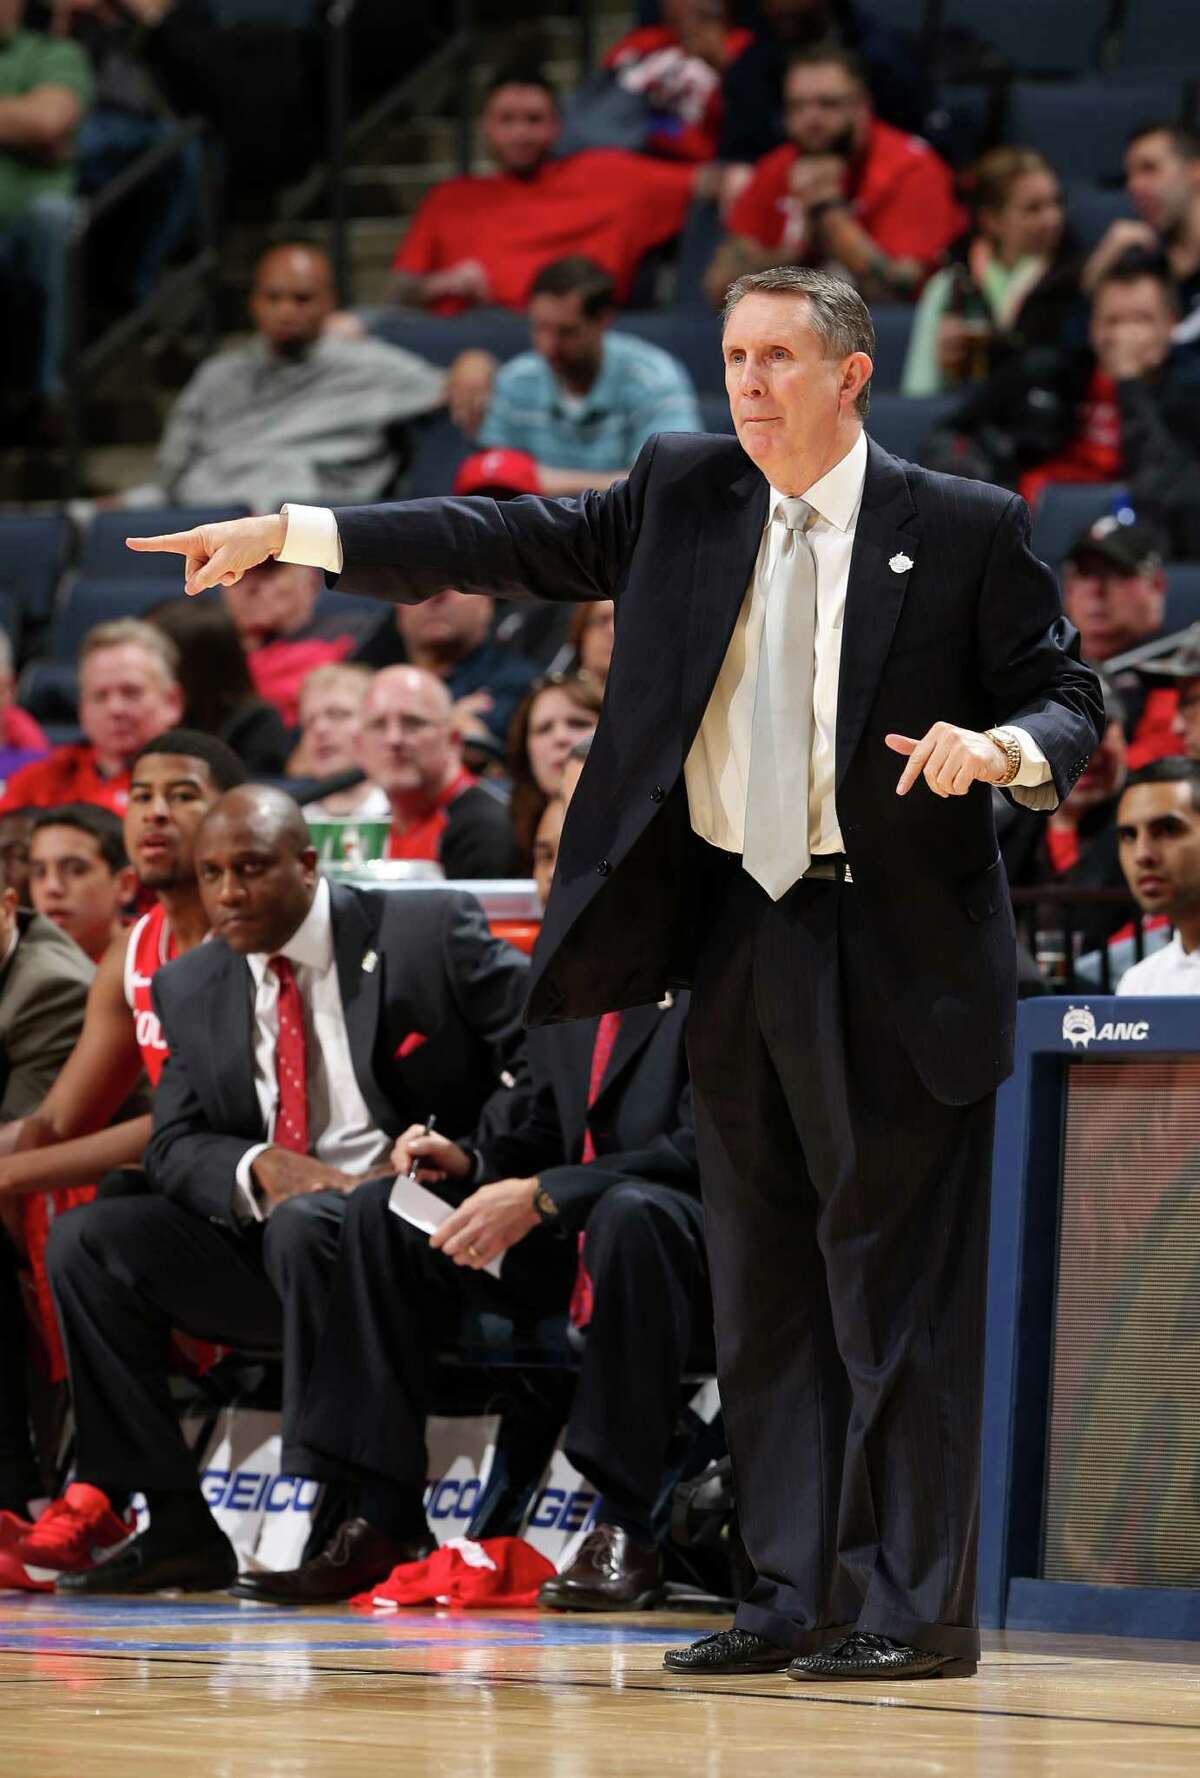 MEMPHIS, TN - MARCH 14: Head coach James Dickey of the Houston Cougars directs his team from the sideline against the Louisville Cardinals during the semifinals of the American Athletic Conference Tournament at FedExForum on March 14, 2014 in Memphis, Tennessee. Louisville defeated Houston 94-65.